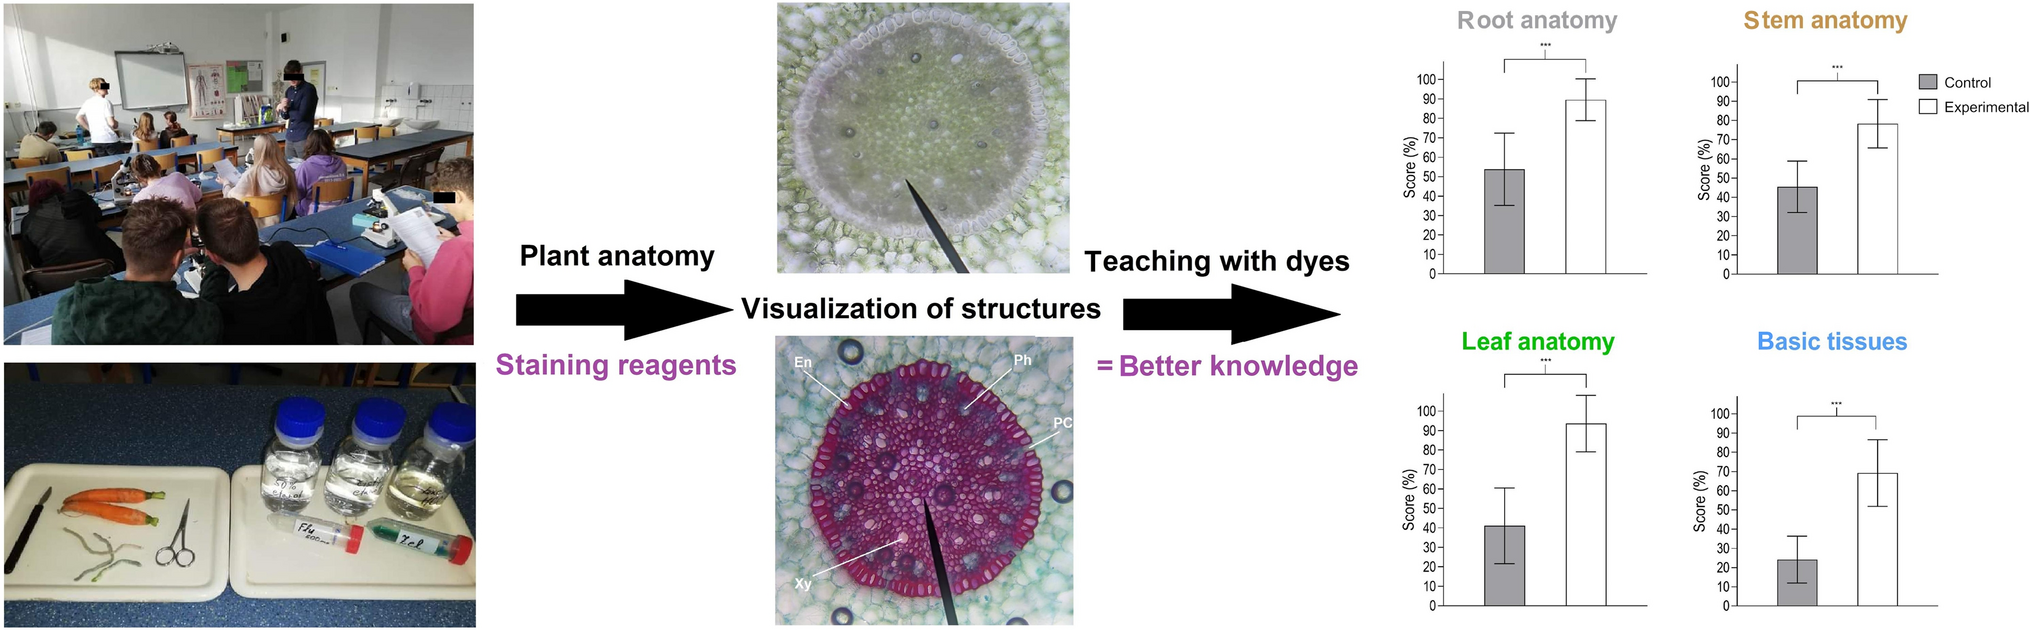 Visual plant anatomy: From science to education and vice versa